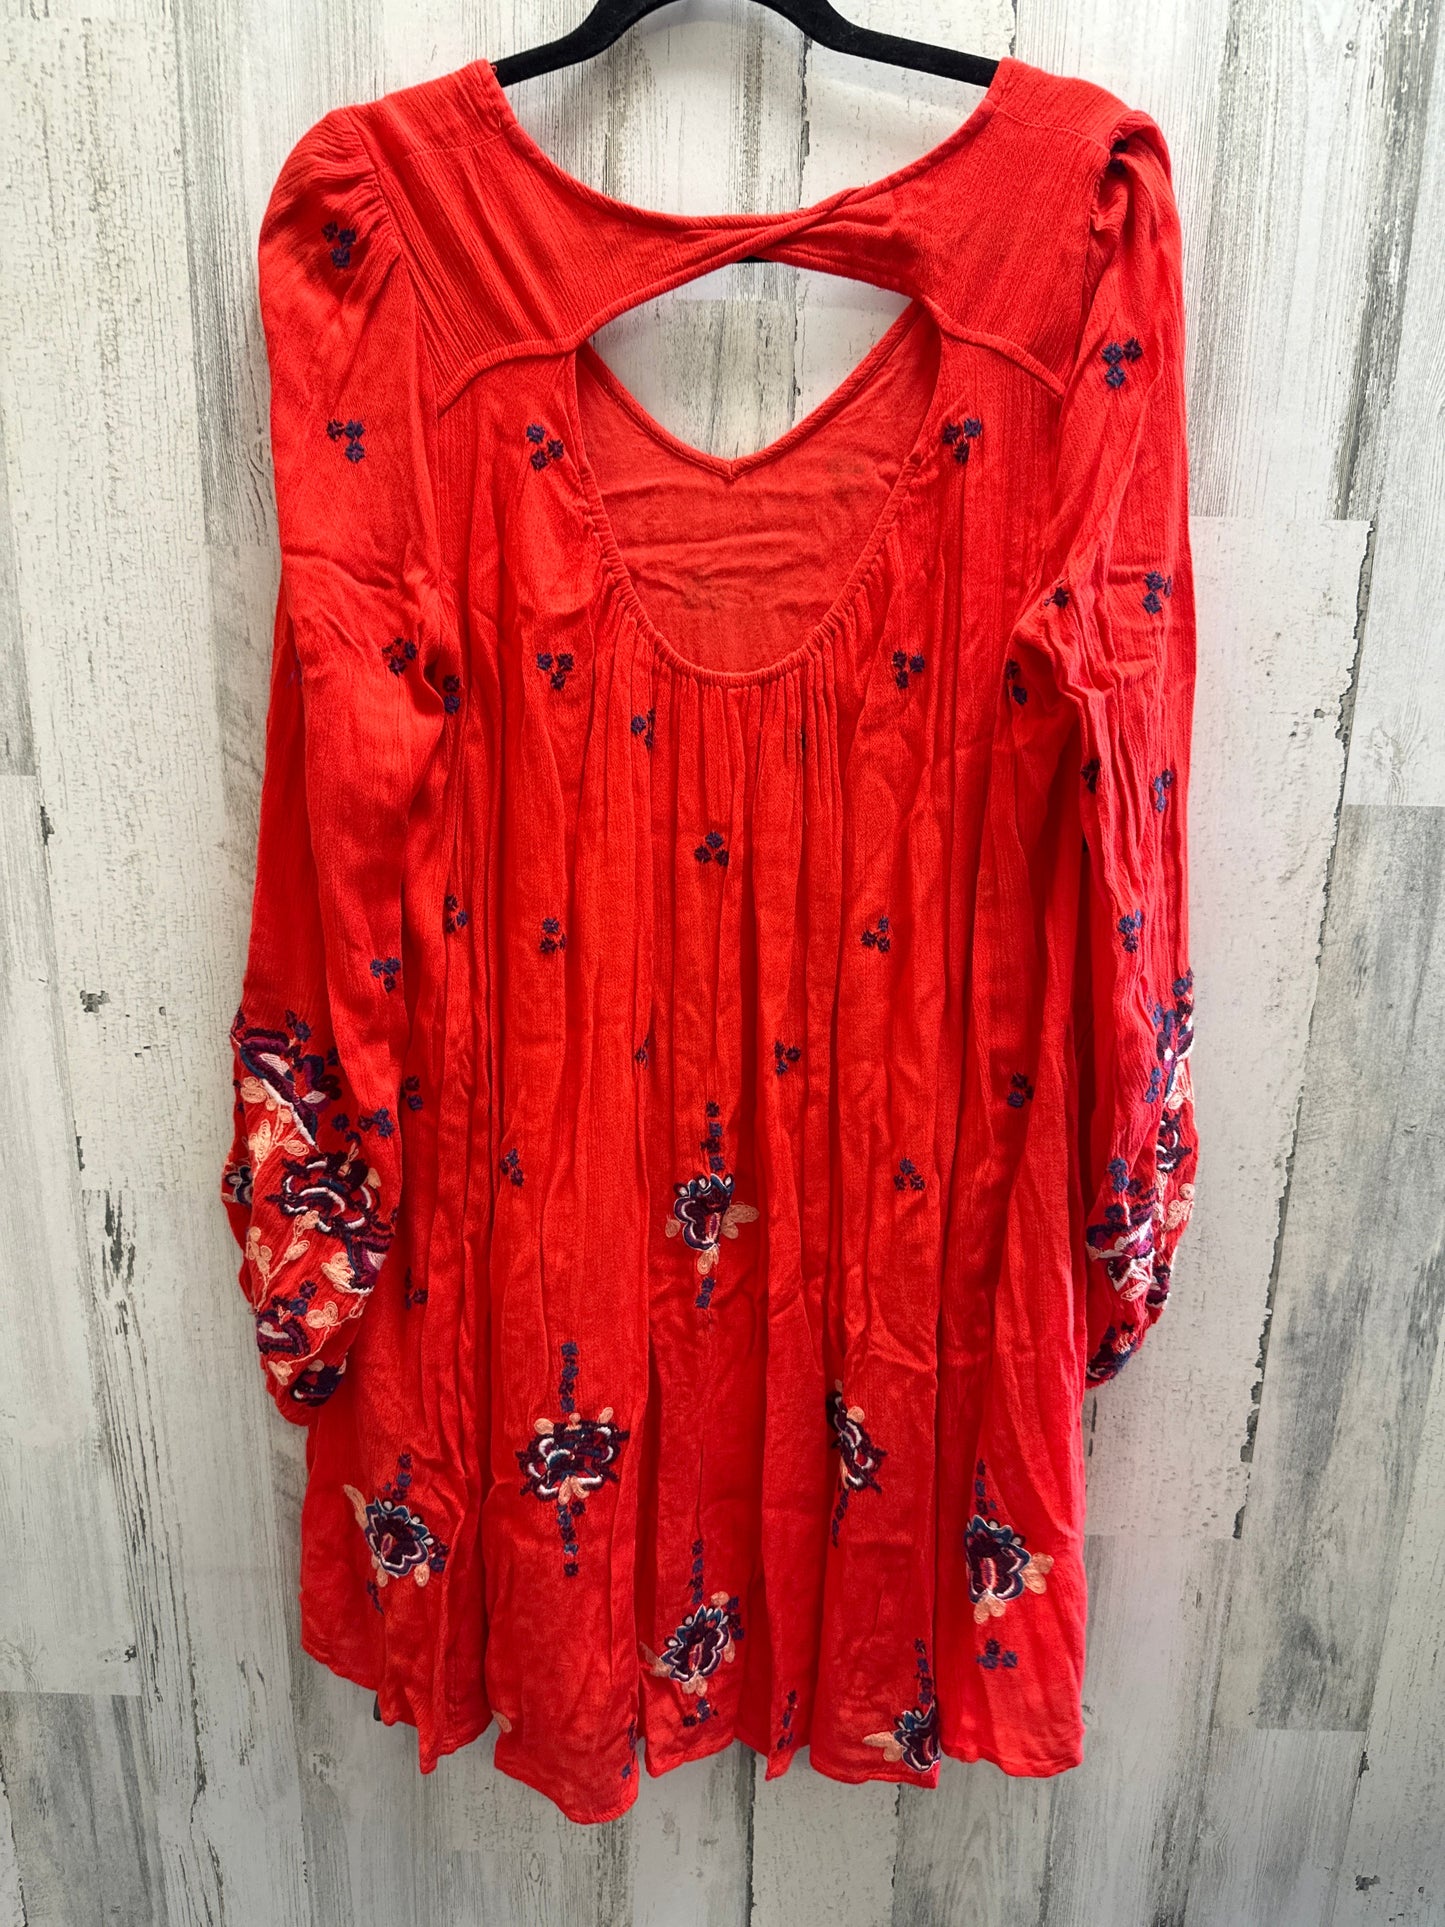 Red Dress Casual Short Free People, Size M